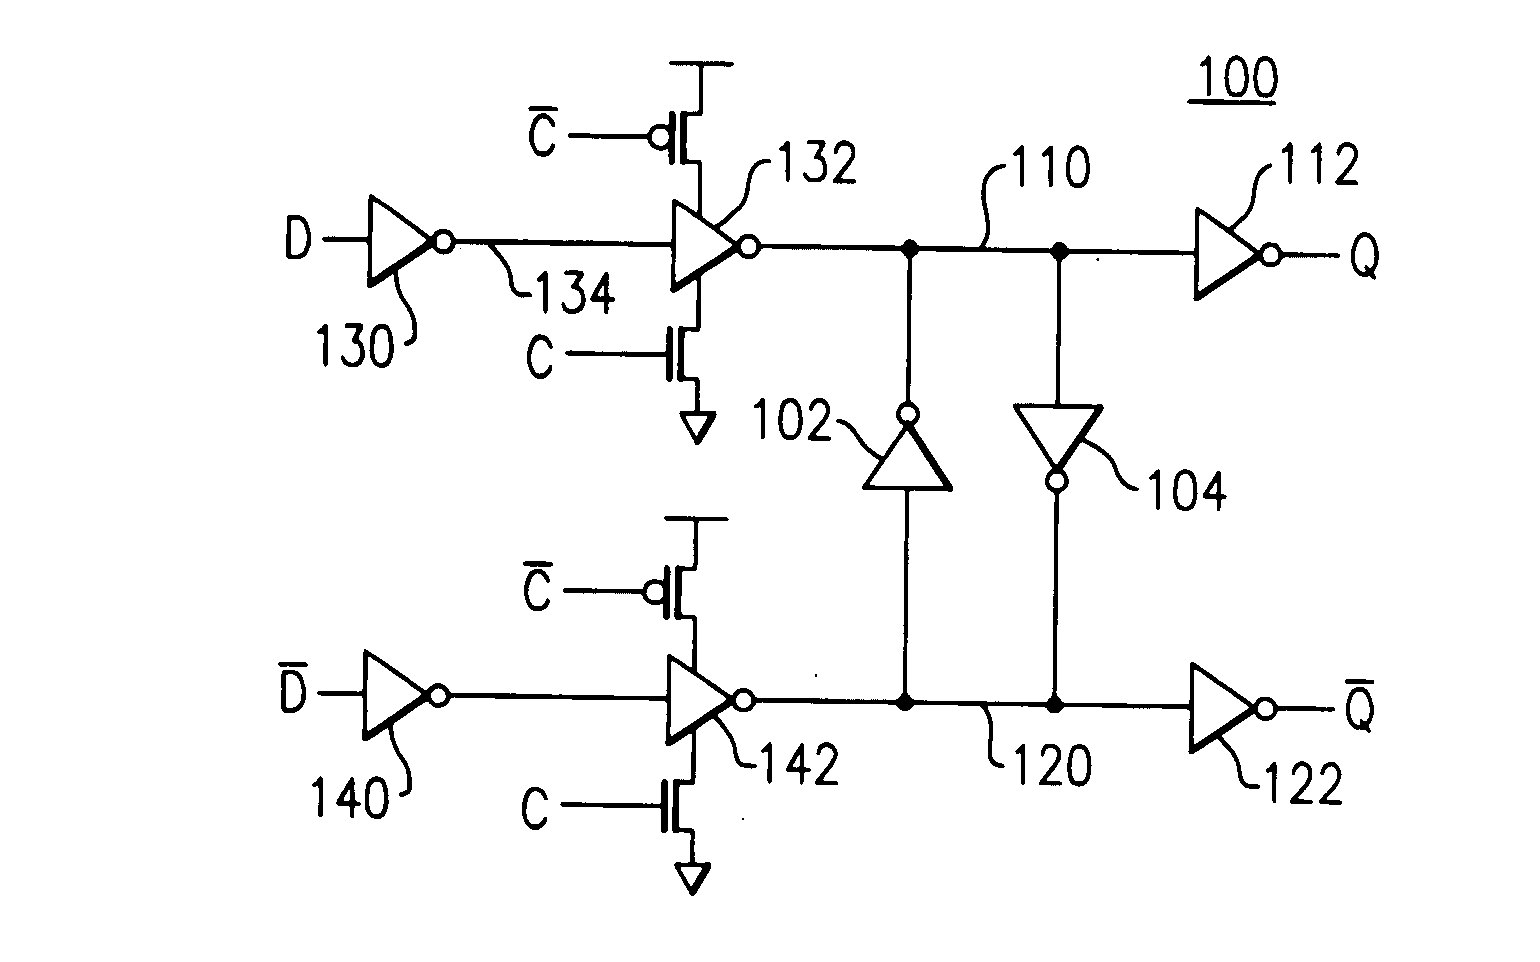 Design structure for CMOS differential rail-to-rail latch circuits